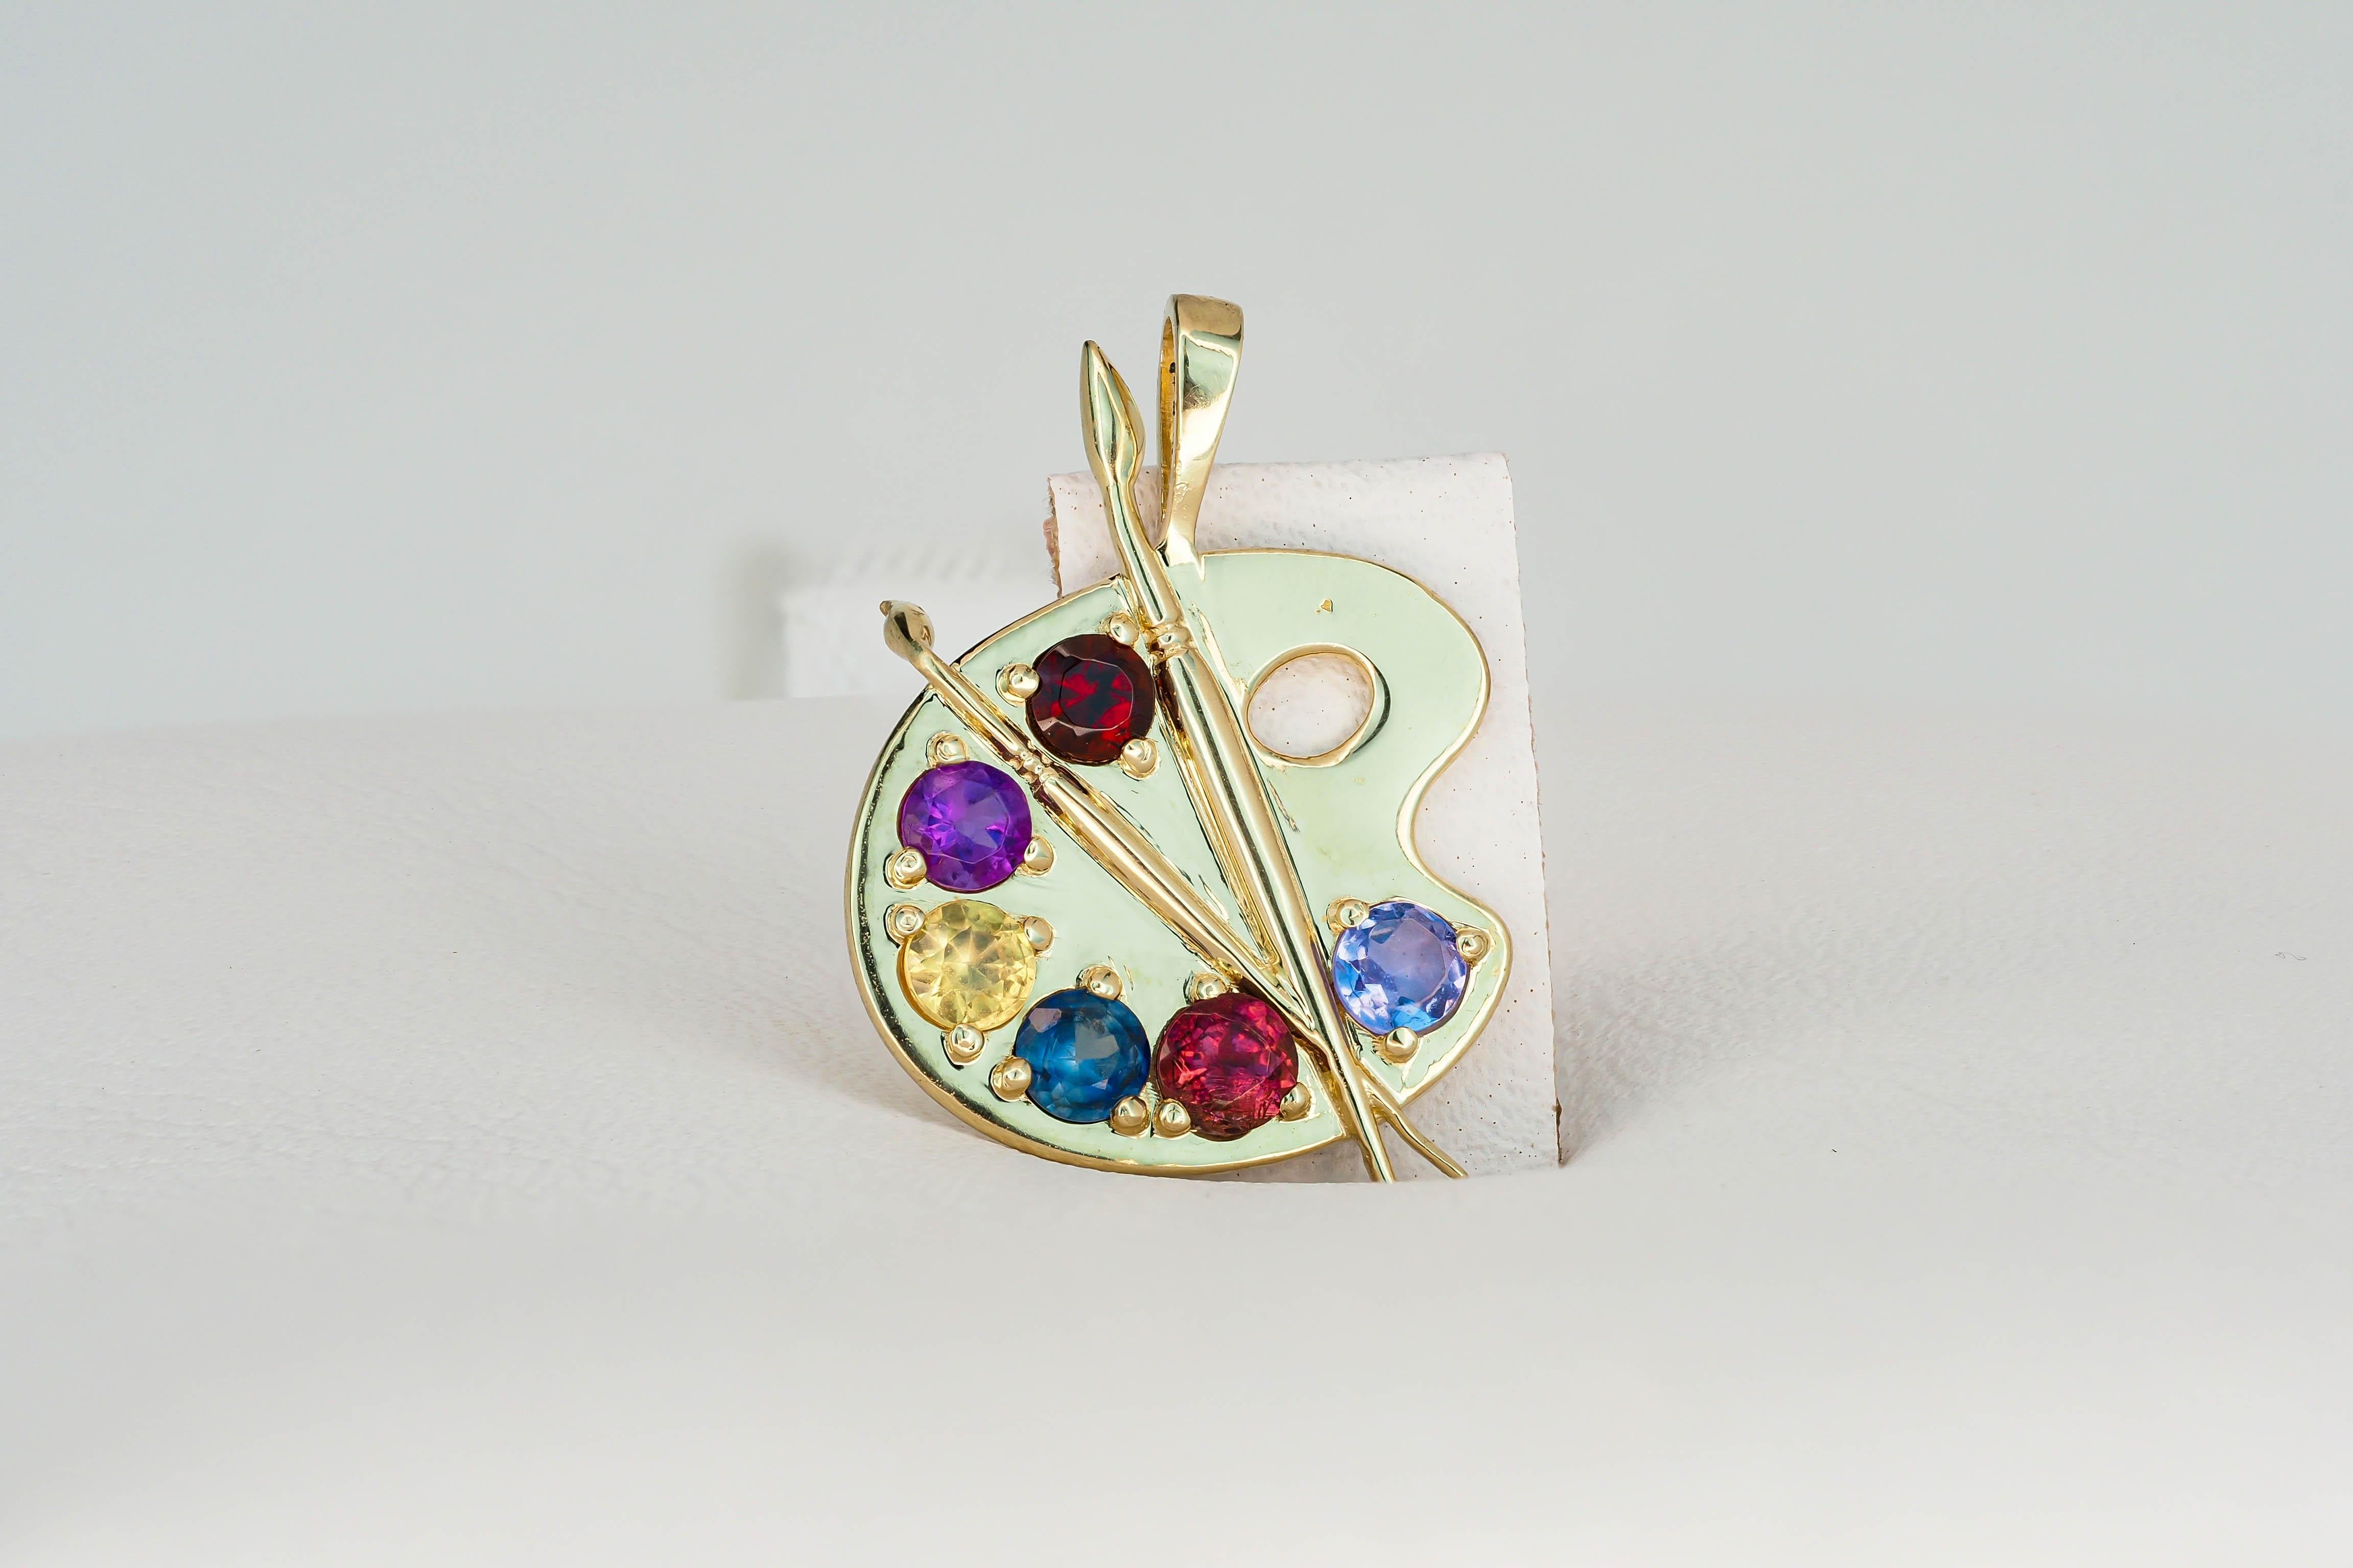 Modern Palette with Paints 14k Gold Pendant with Colored Stones, Paint Palette Pendant For Sale